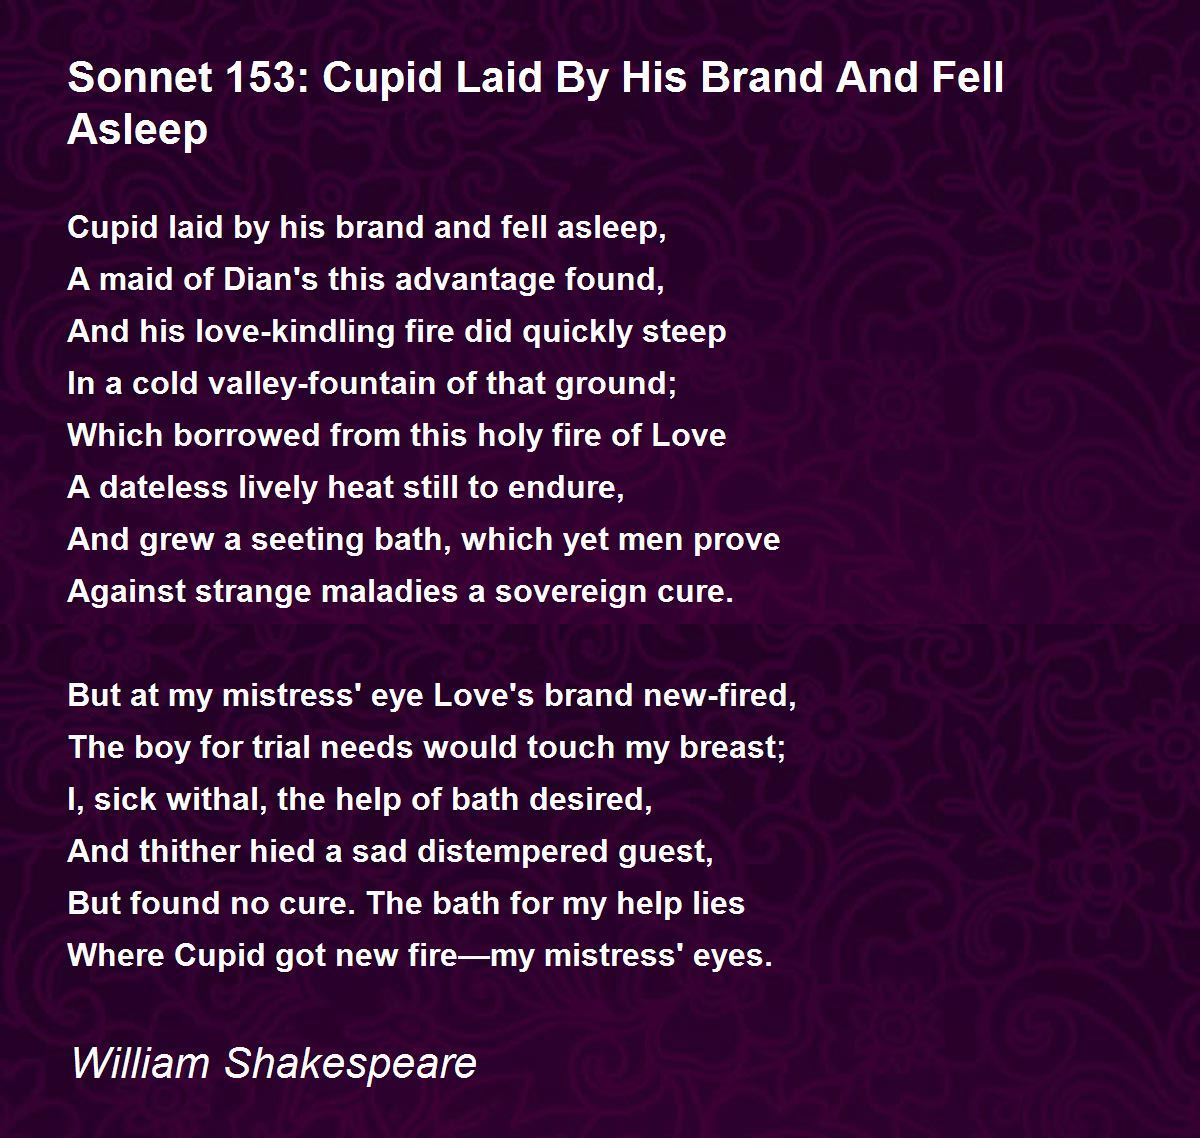 sonnet 153 cupid laid by his brand and fell asle